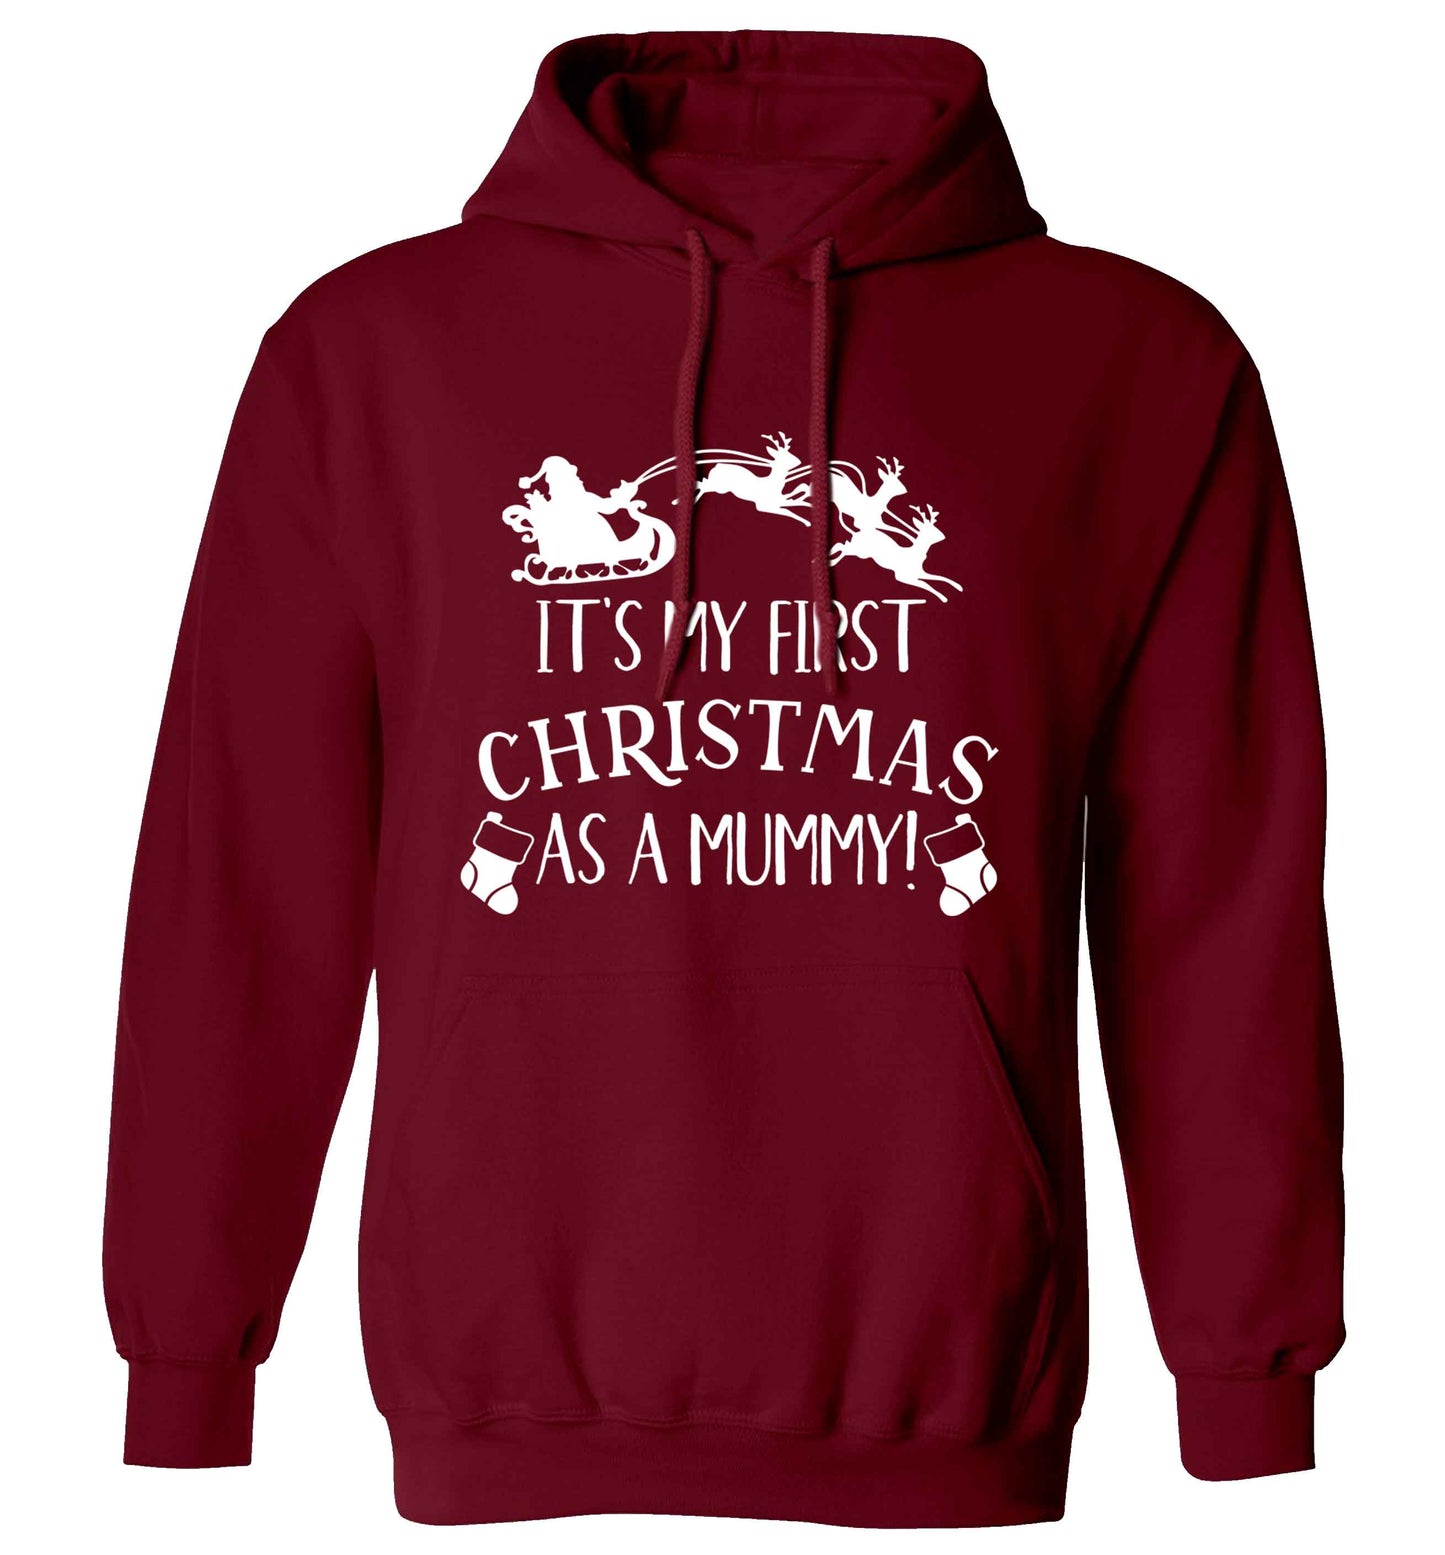 It's my first Christmas as a mummy adults unisex maroon hoodie 2XL